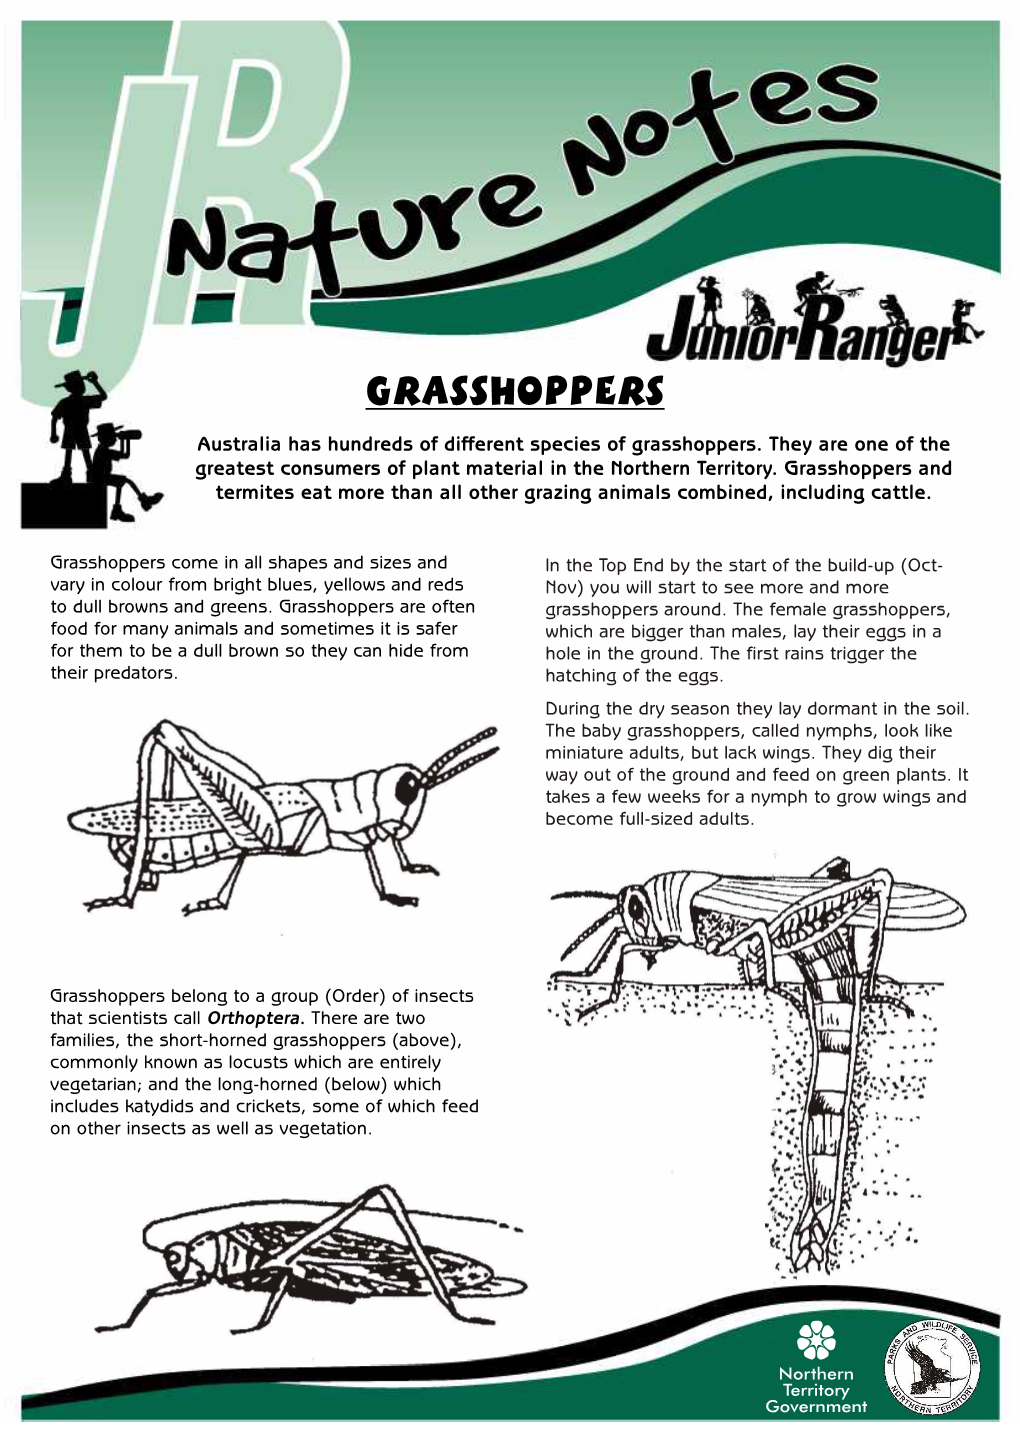 Grasshoppers. They Are One of the Greatest Consumers of Plant Material in the Northern Territory